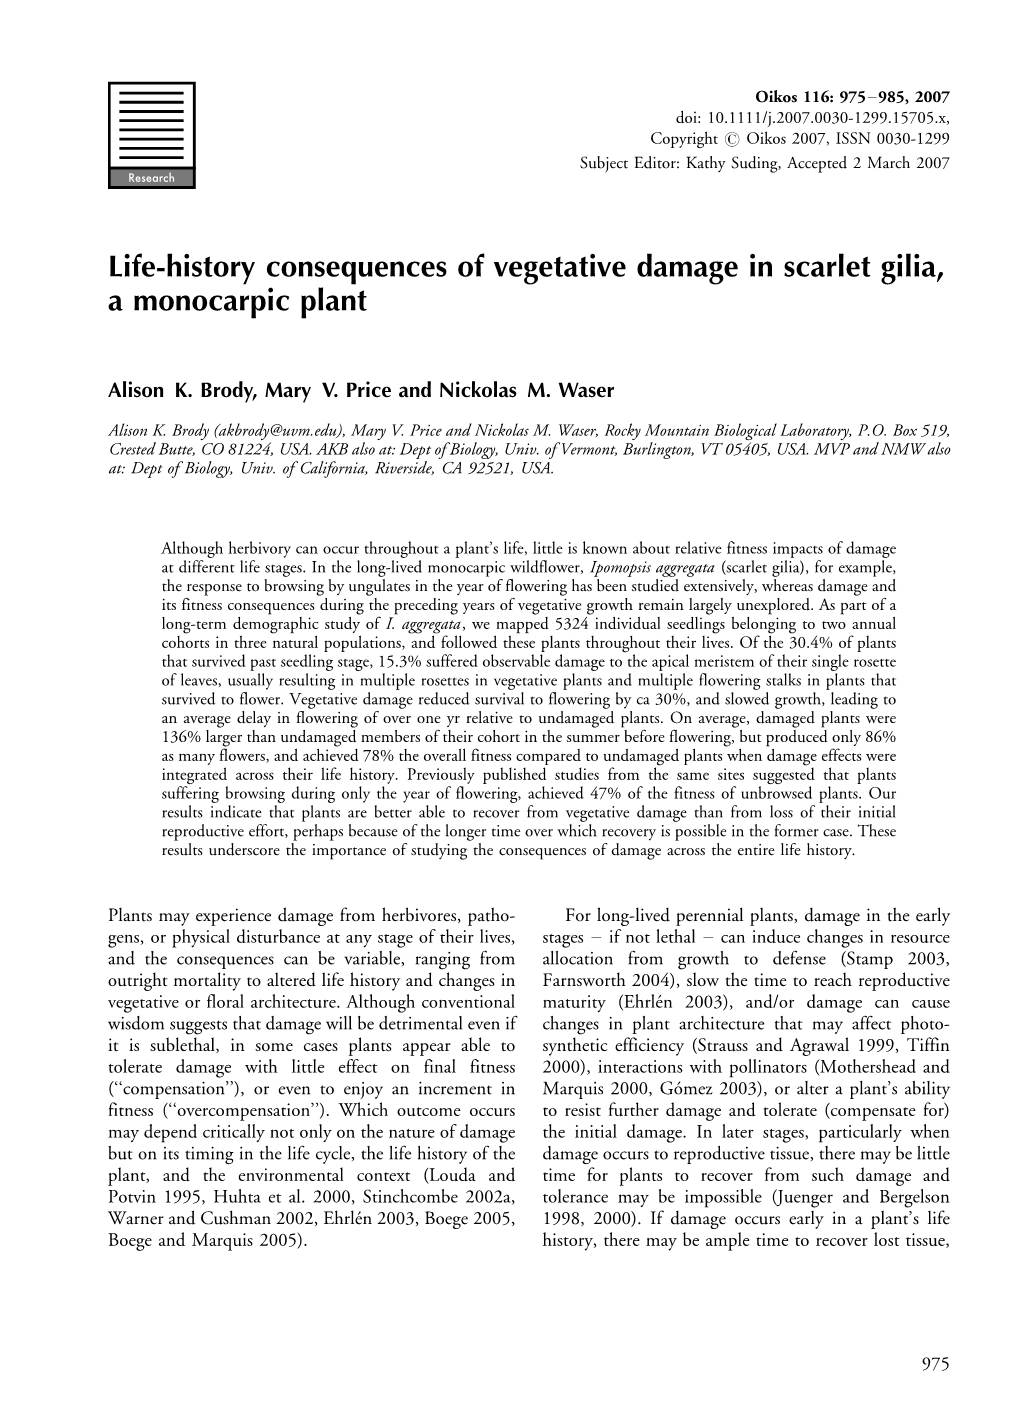 Life-History Consequences of Vegetative Damage in Scarlet Gilia, a Monocarpic Plant